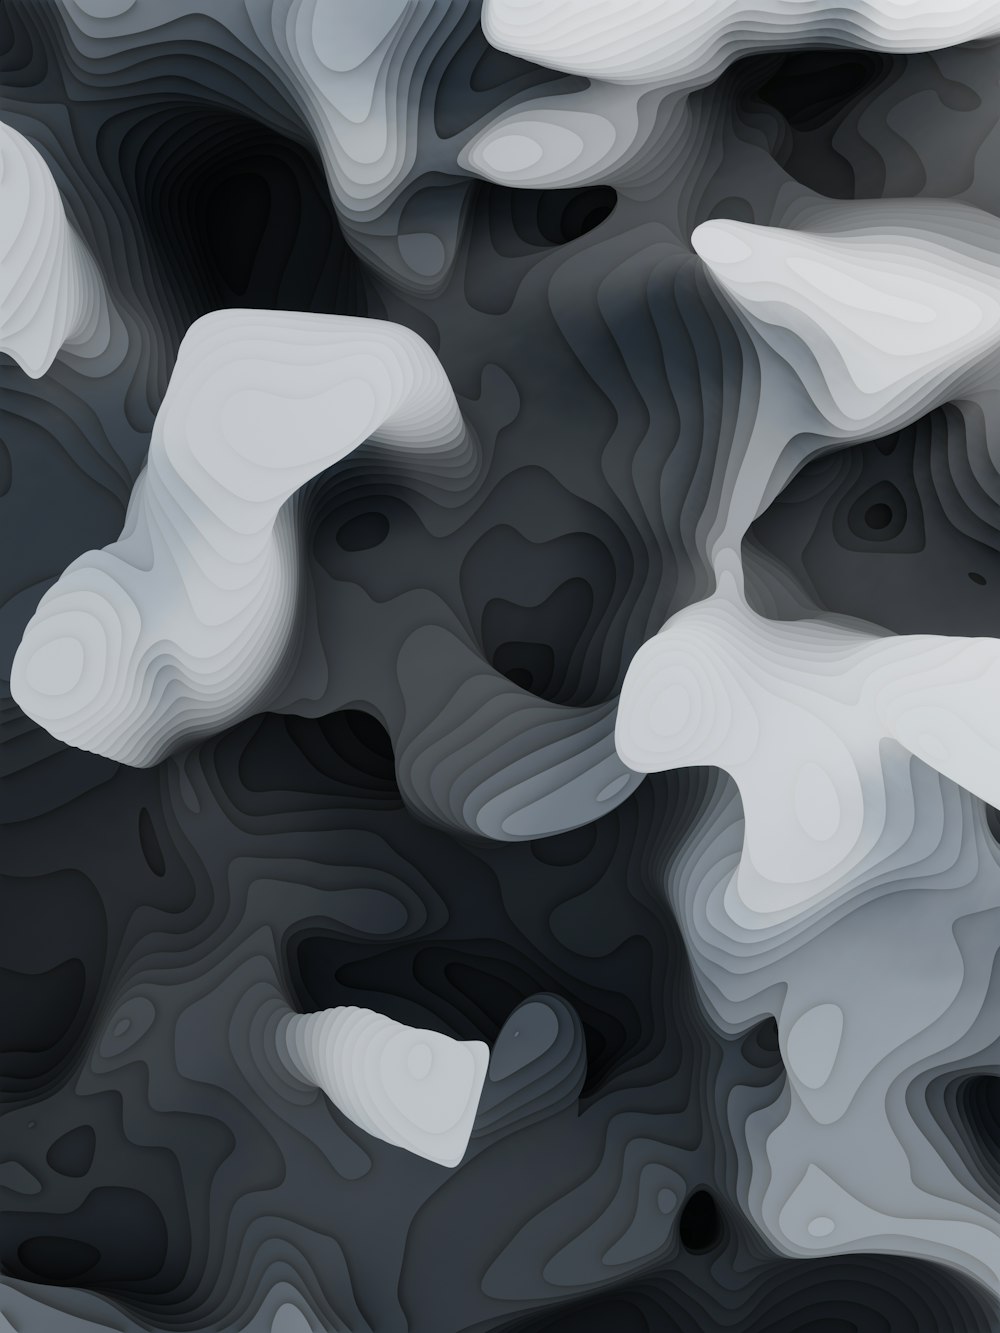 a black and white abstract background with wavy shapes